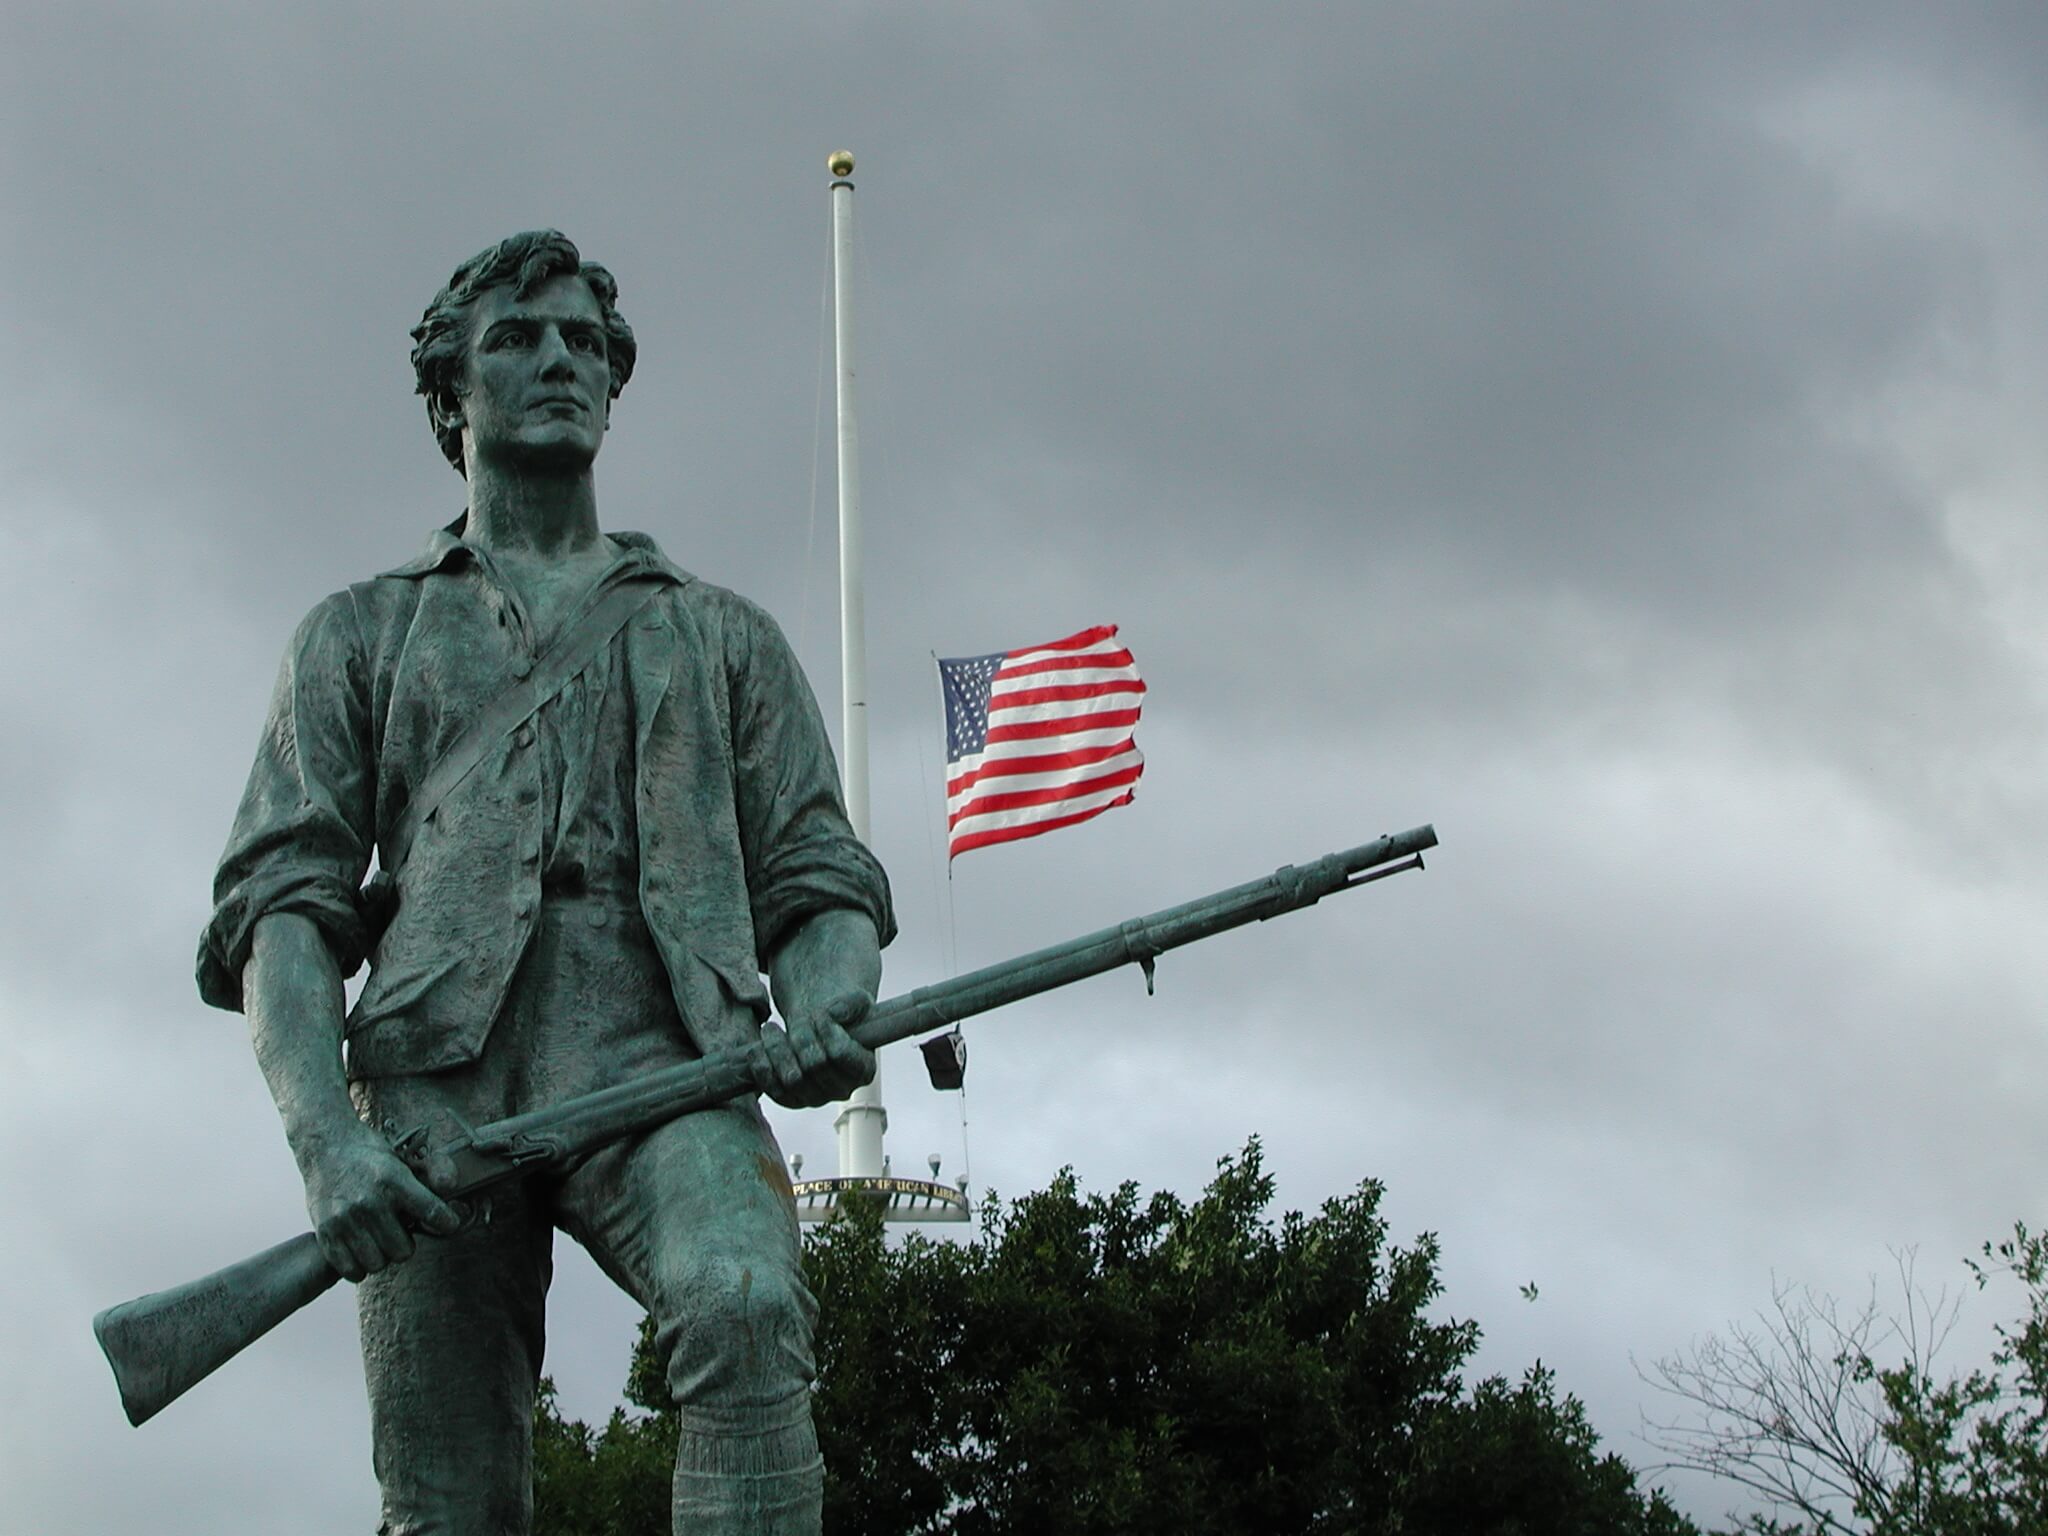 Minuteman sculpture by Henry Hudson Kitson stands in Minute Man National Historical Park in Massachusetts.